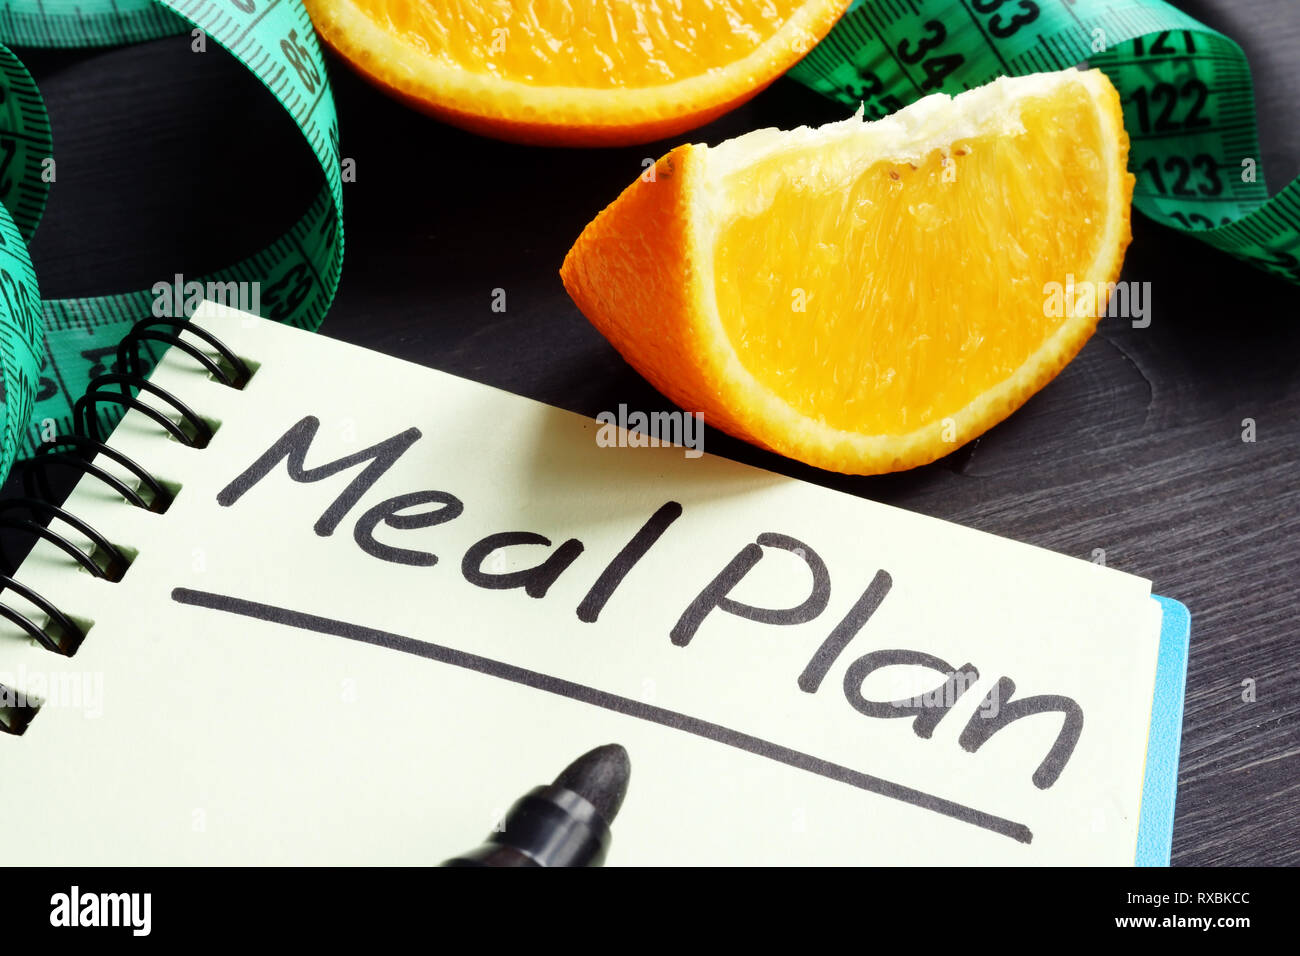 Meal plan concept. Note pad and measuring tape. Stock Photo